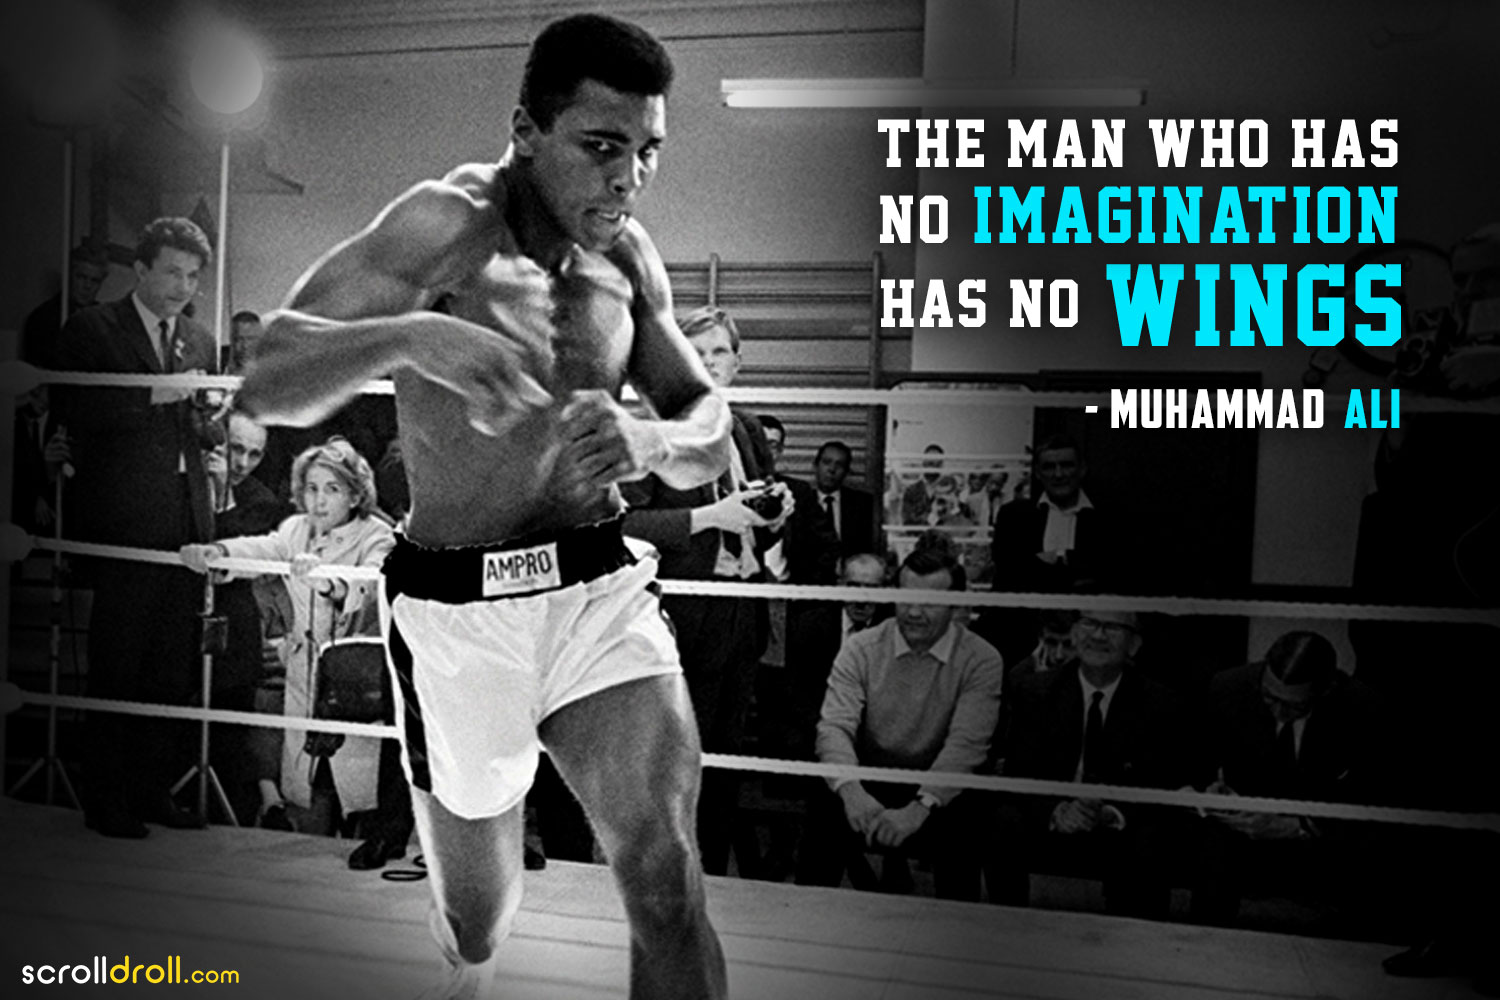 Boxer or not - These Muhammad Ali Quotes will punch you in the gut